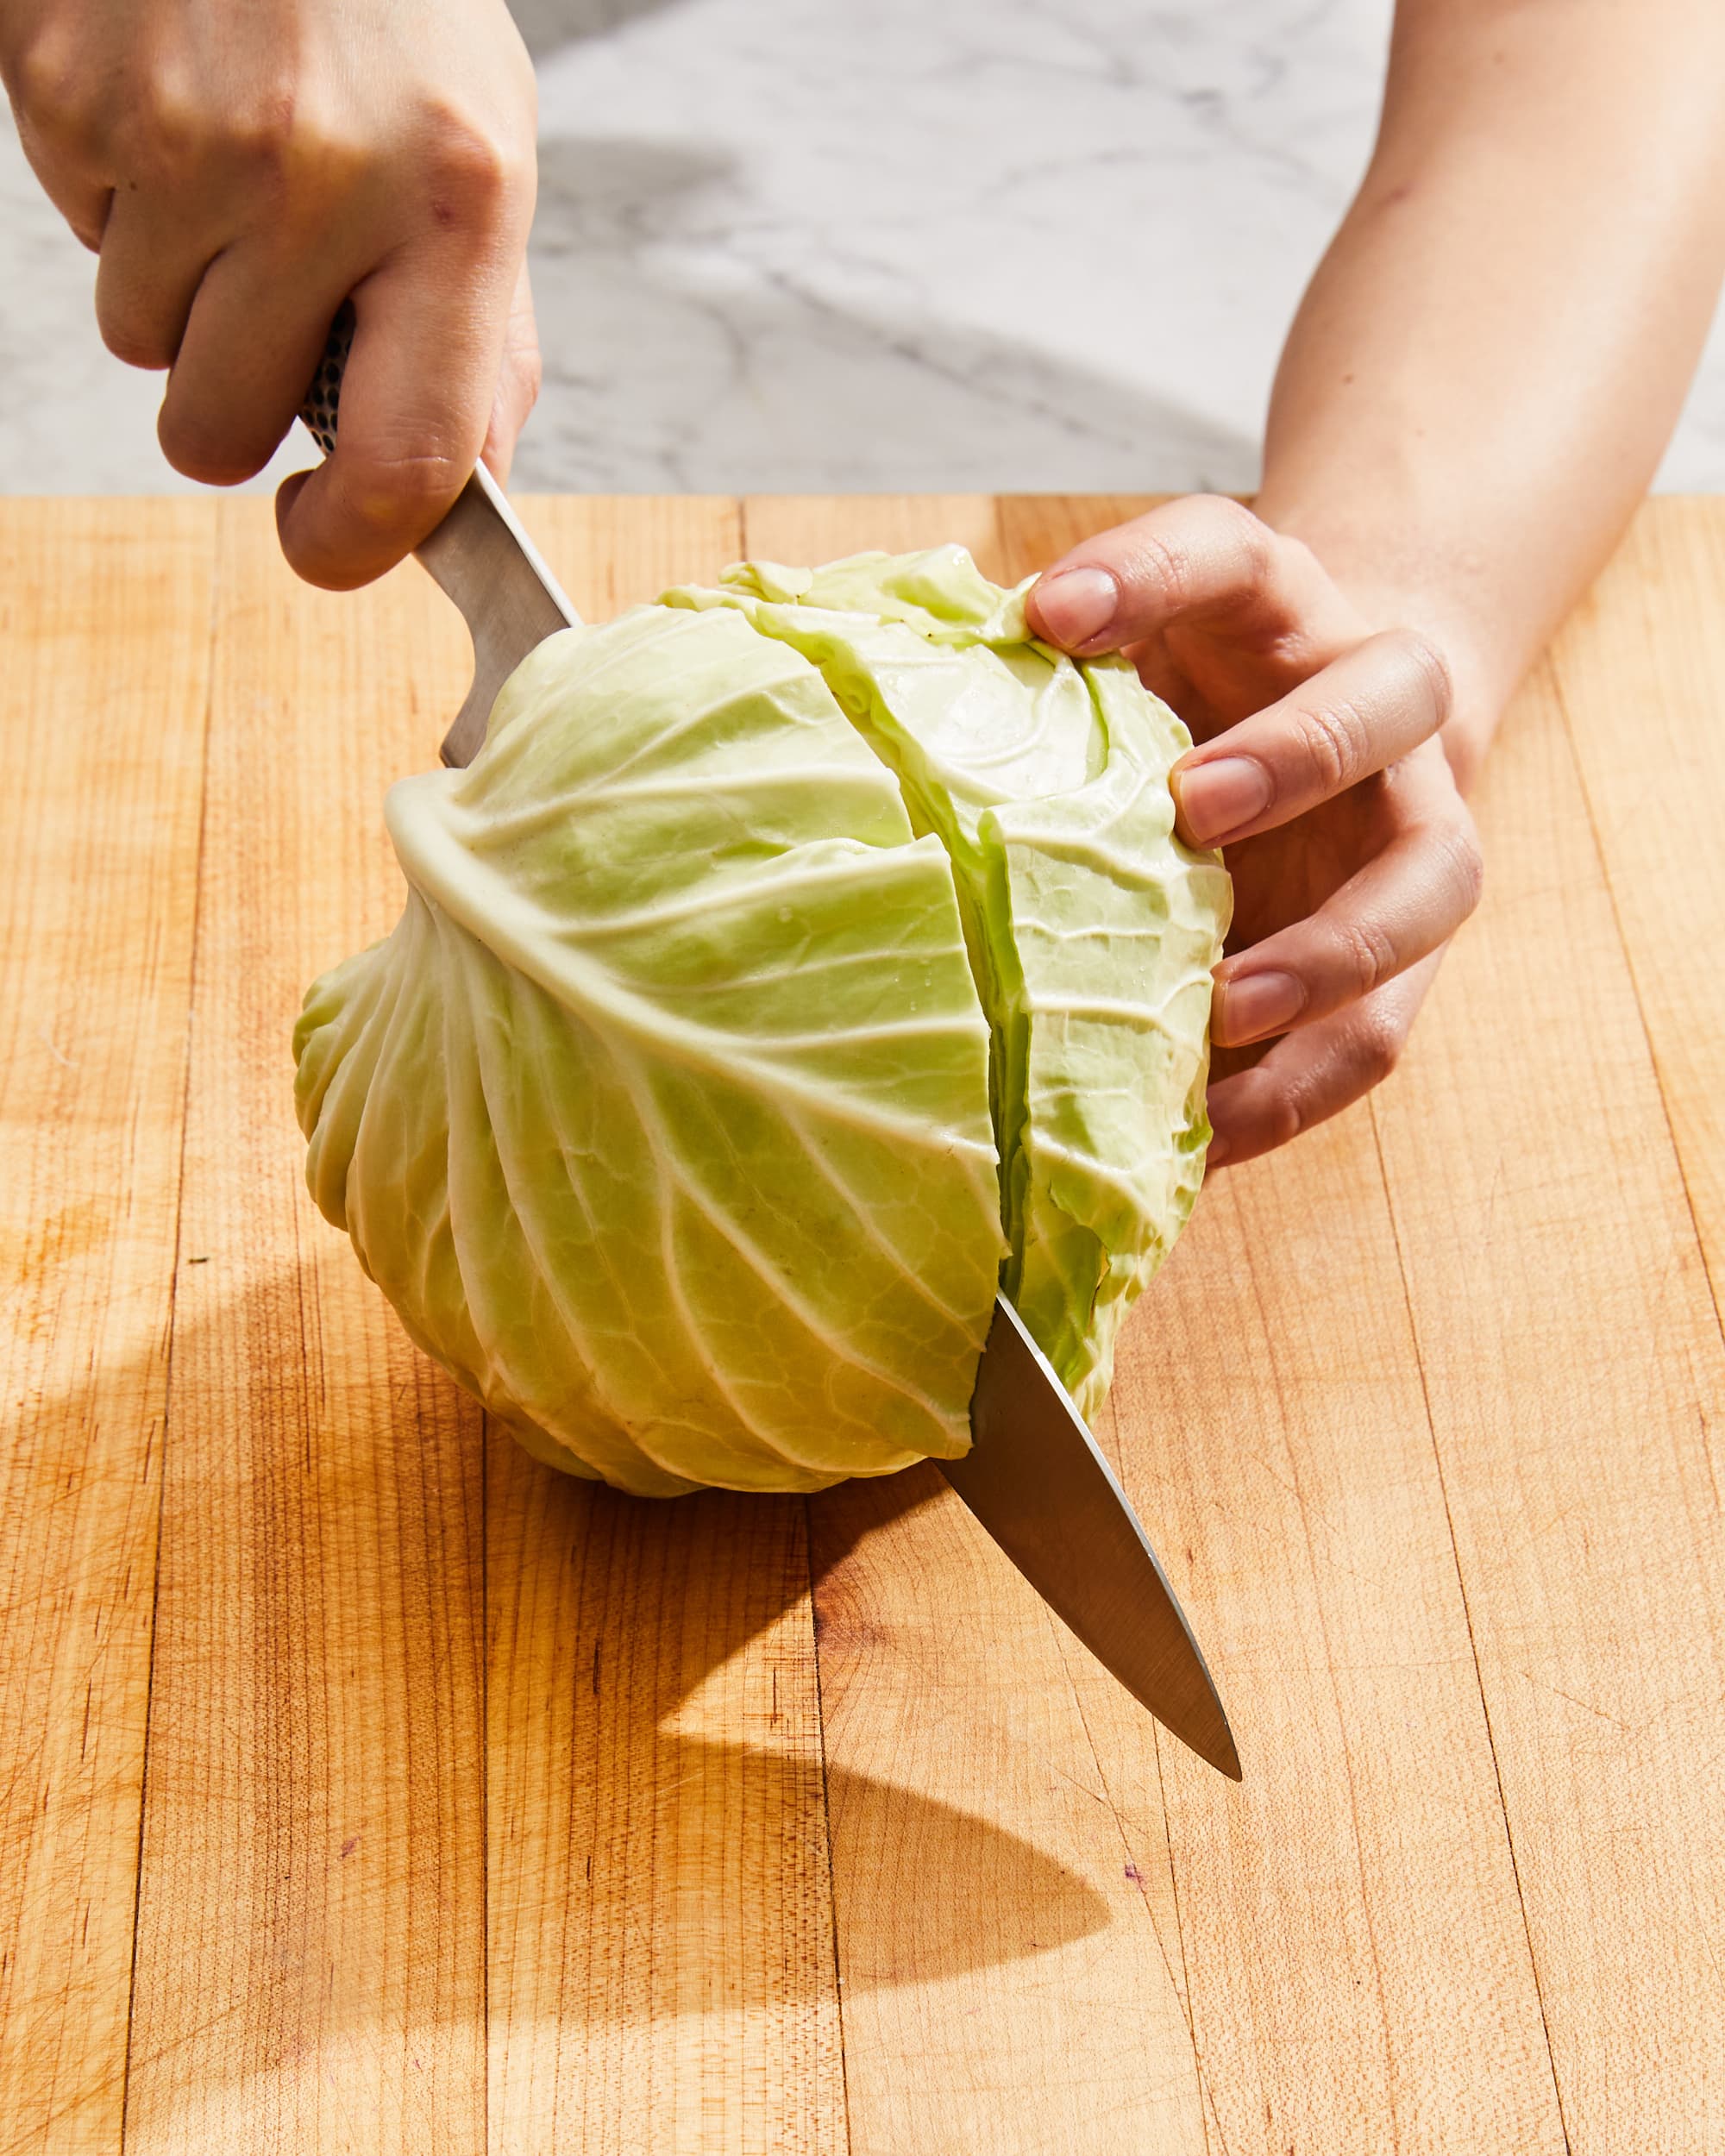 How to Shred Cabbage with a Mandoline - It's a Veg World After All®